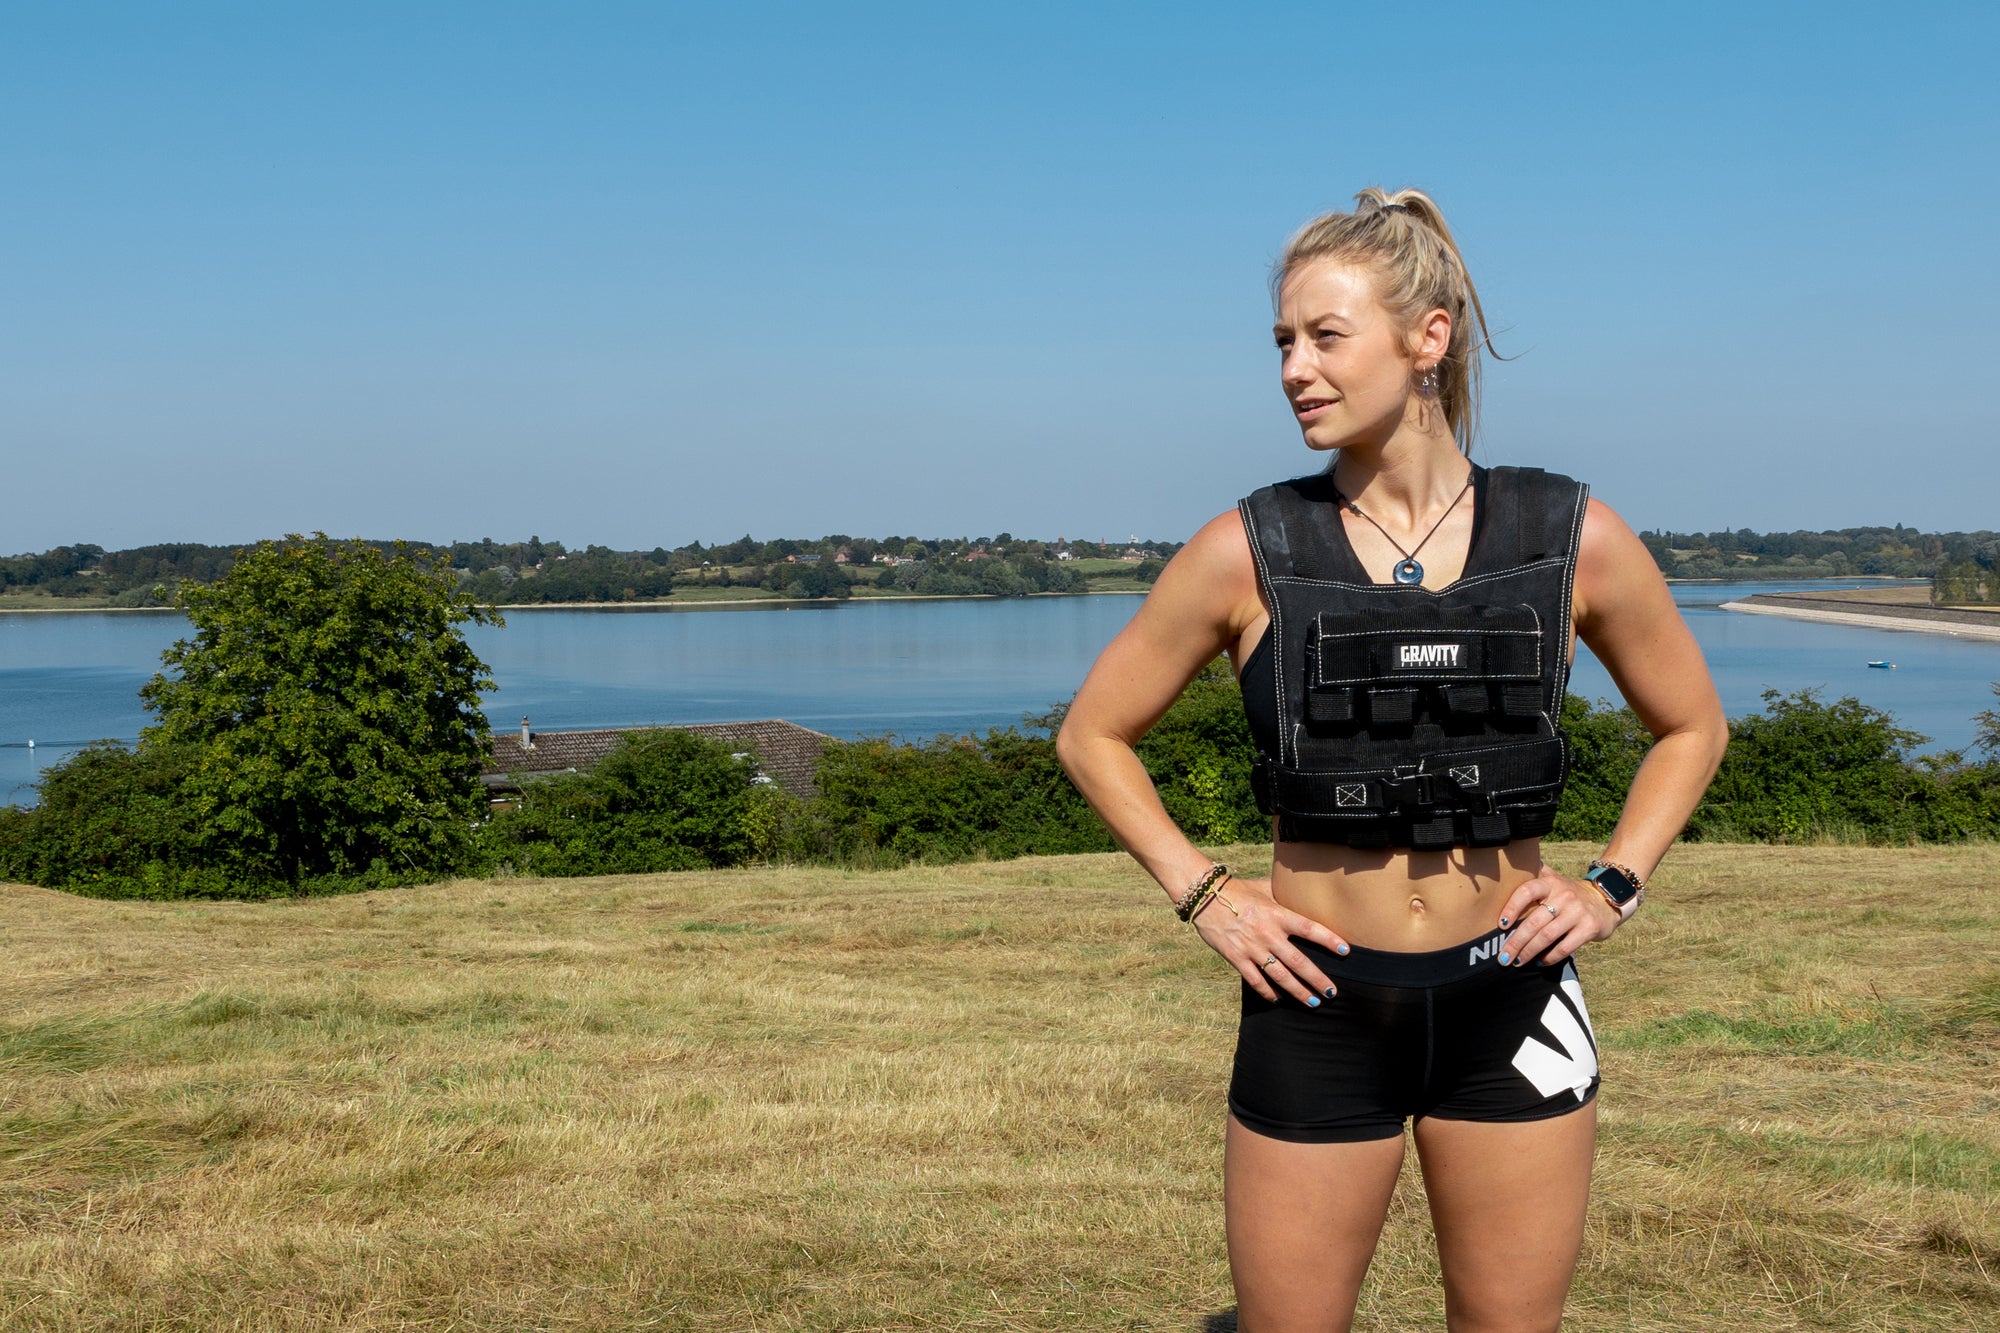 Getting the most out of your weighted vest